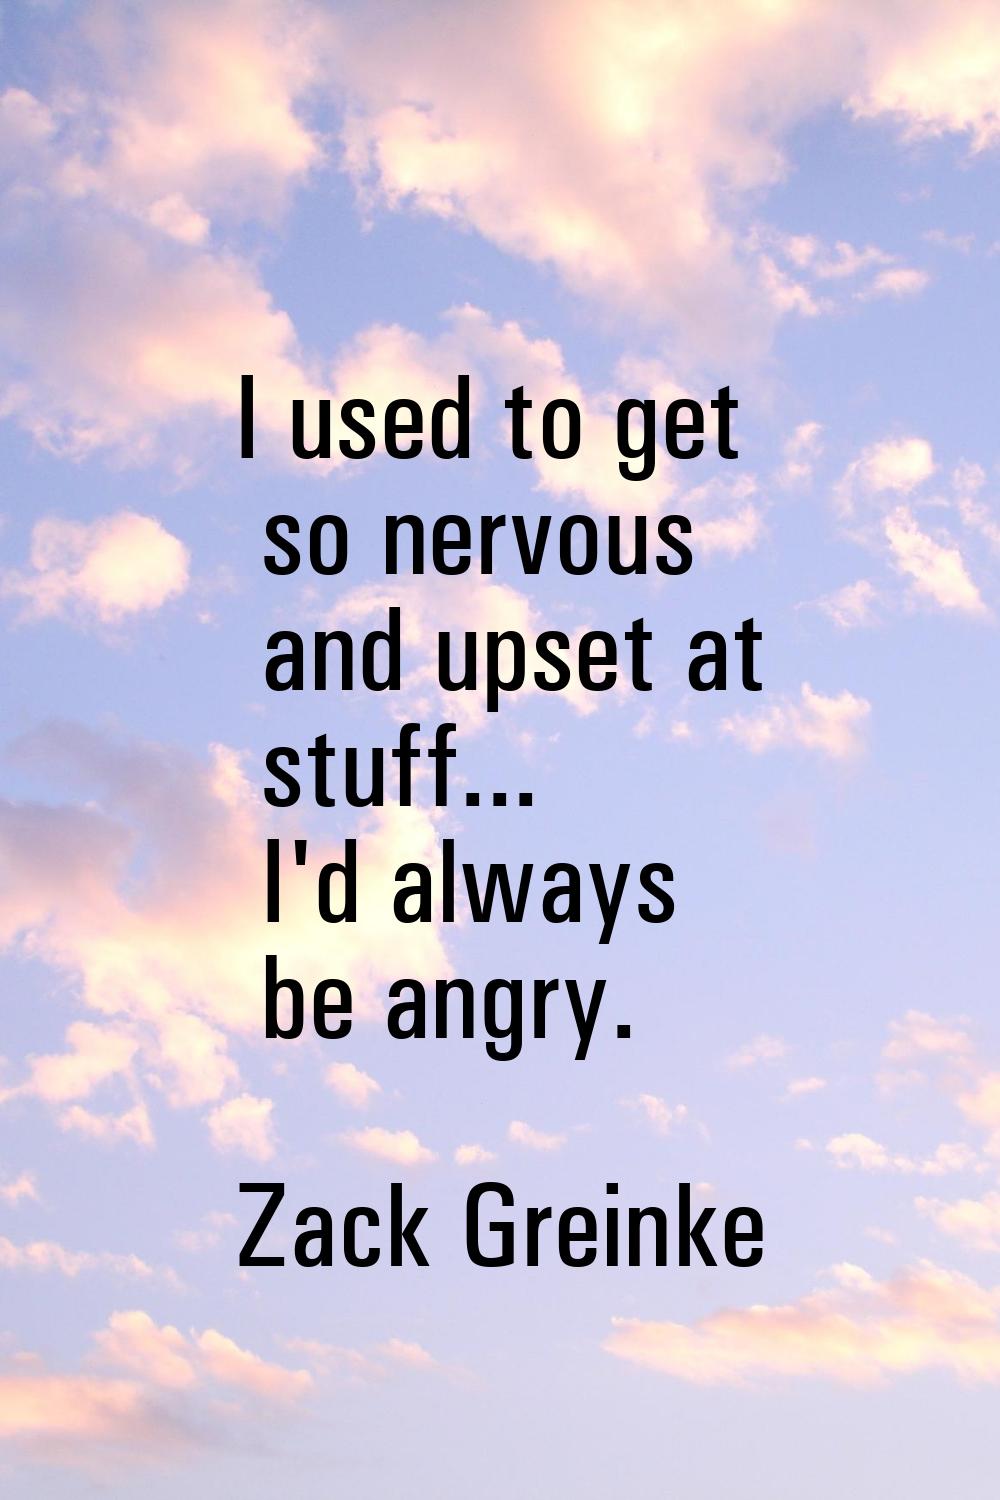 I used to get so nervous and upset at stuff... I'd always be angry.